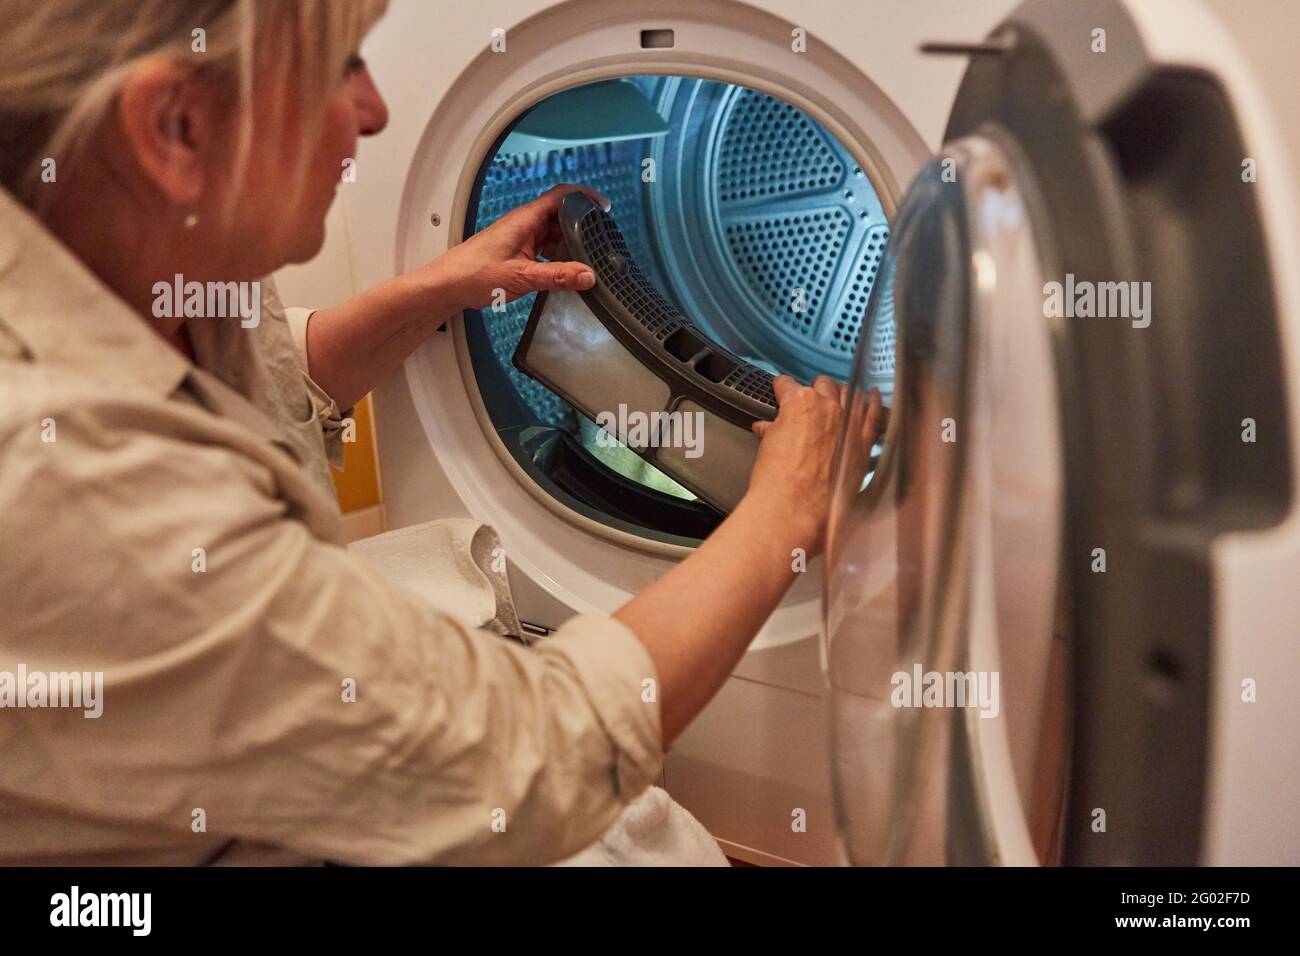 https://c8.alamy.com/comp/2G02F7D/a-housewife-woman-cleans-the-lint-filter-of-the-washing-machine-or-tumble-dryer-2G02F7D.jpg